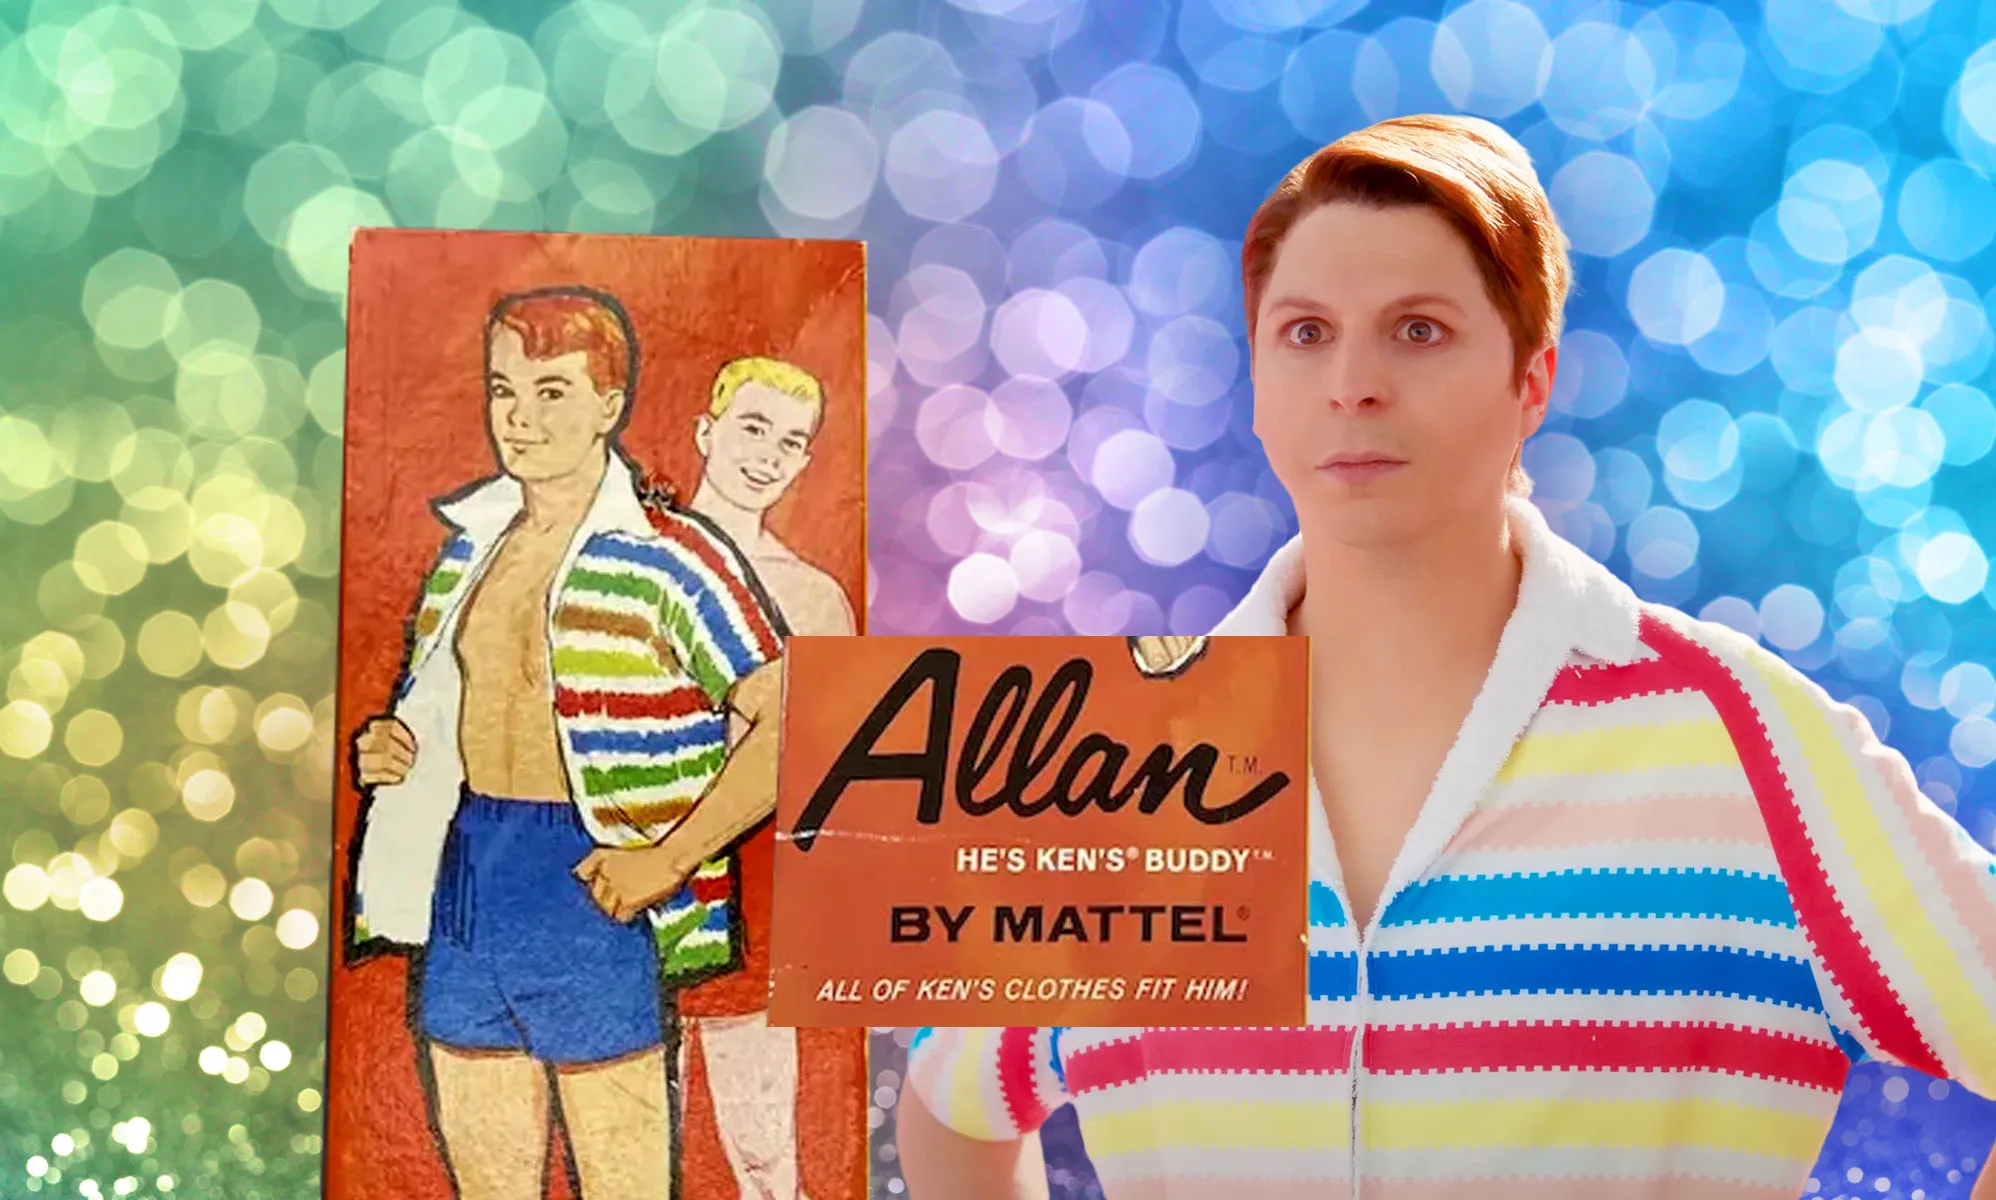 Here's the Gay Origin Story of Michael Cera's 'Barbie' Character